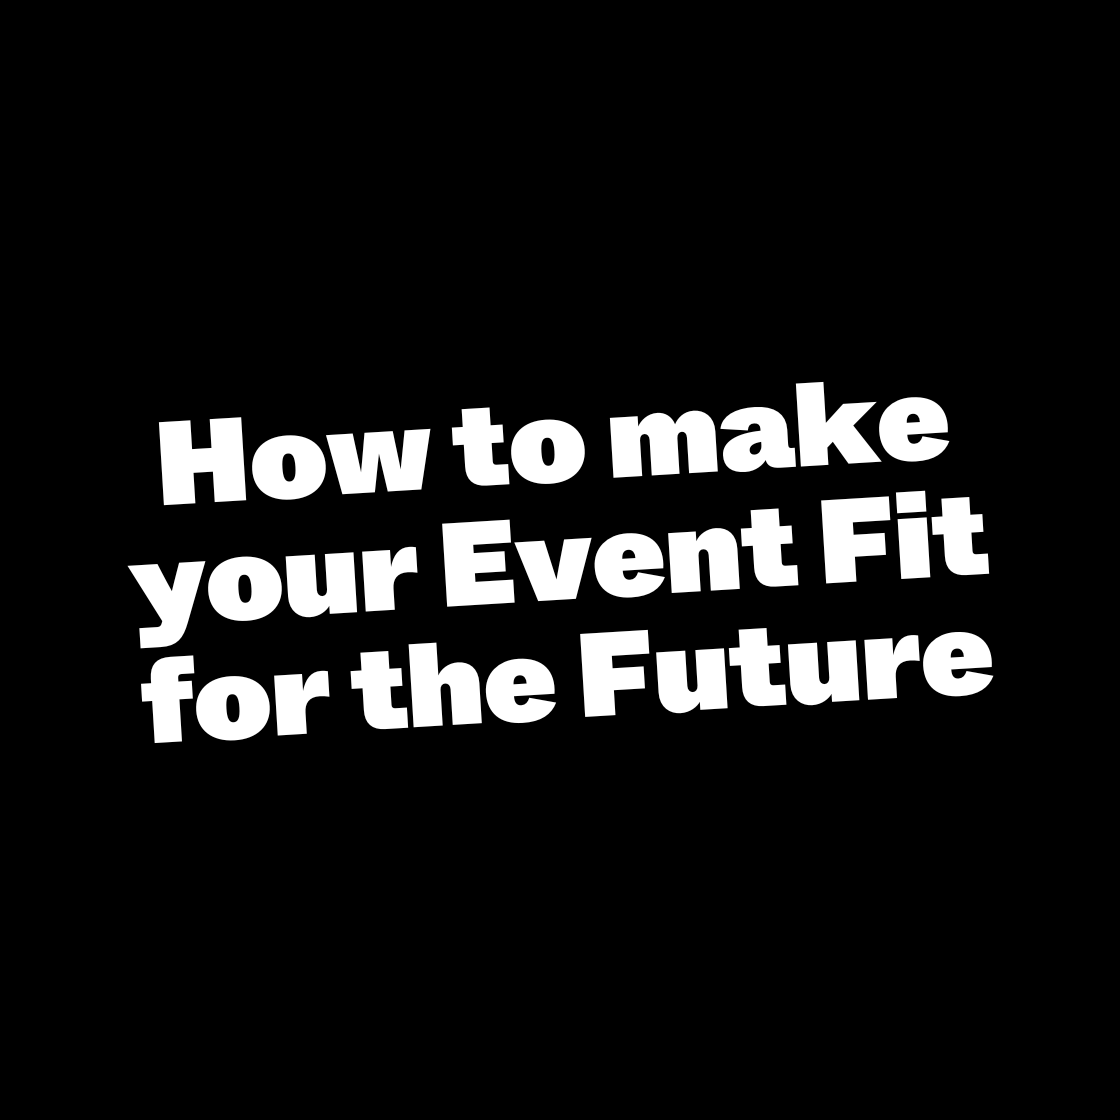 How to make your Event Fit for the Future